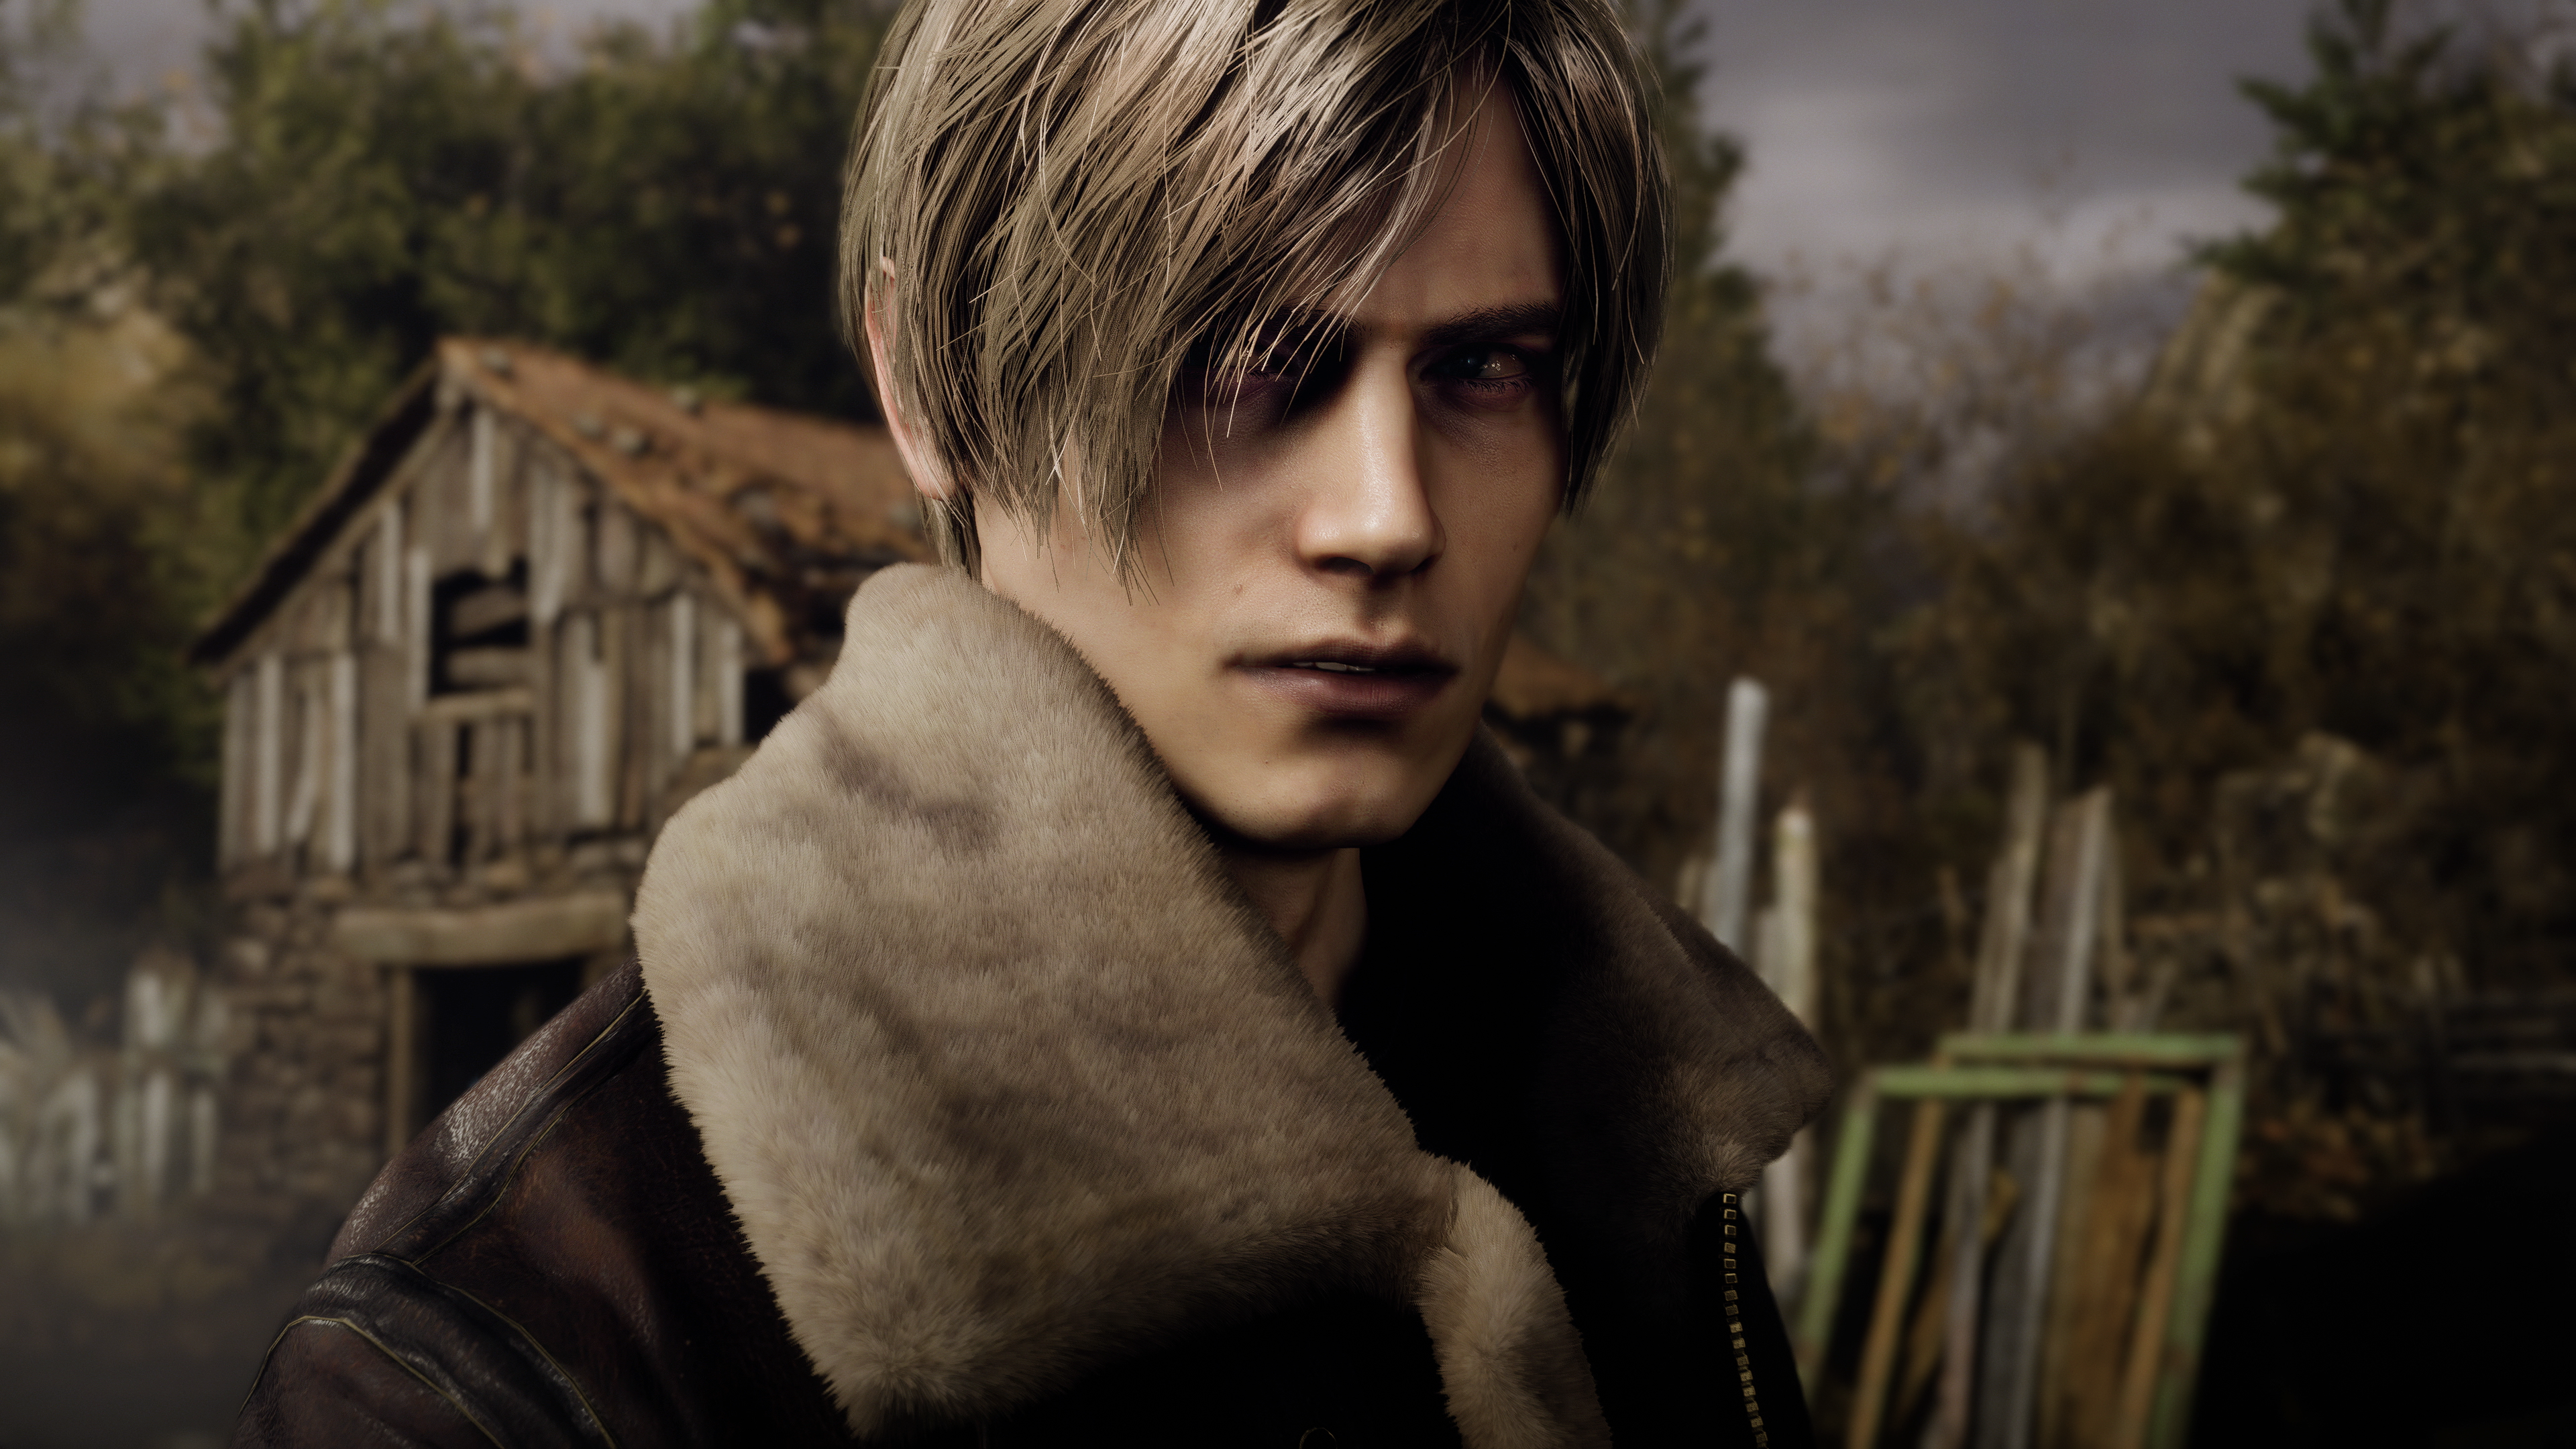 Leon S. Kennedy, in the Resident Evil 4 Remake.